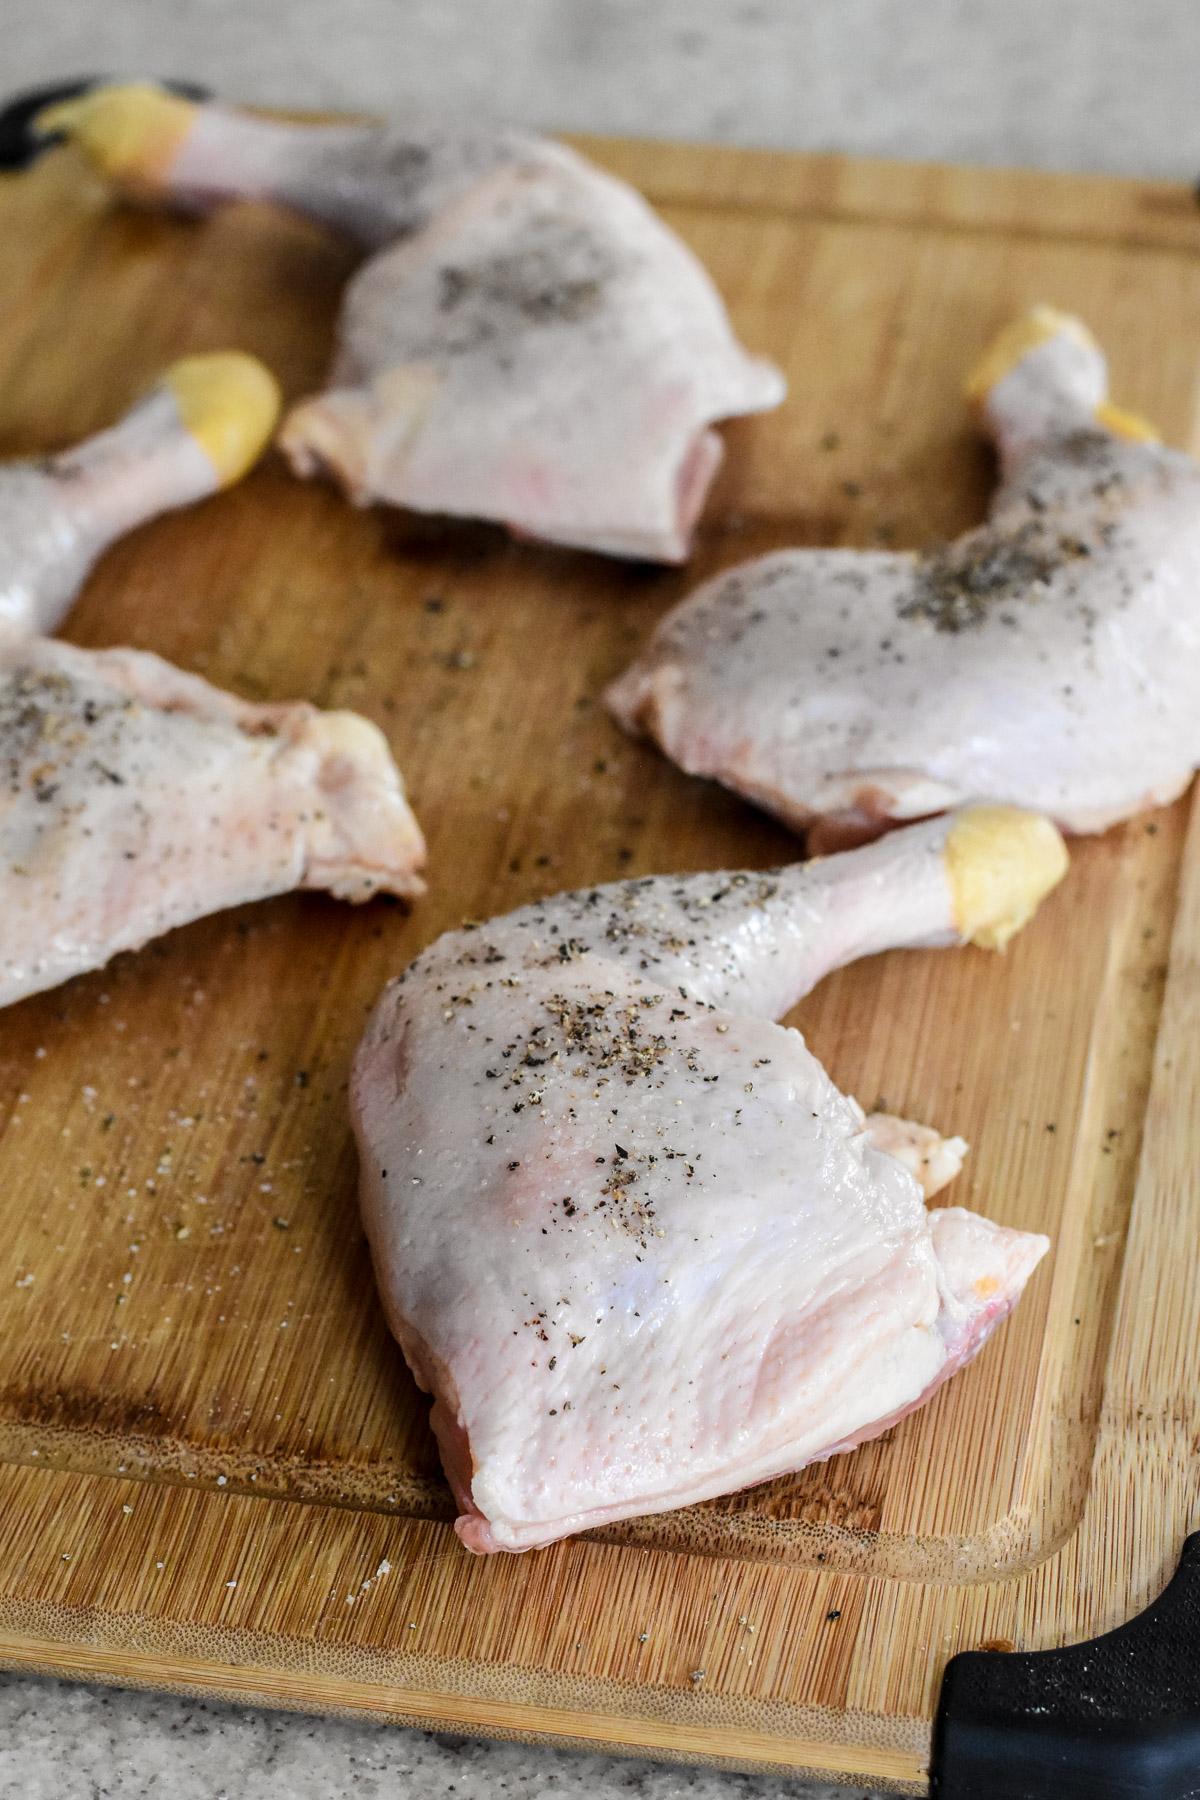 Thoroughly dry the chicken pieces and season with salt and pepper. (Audrey Le Goff)